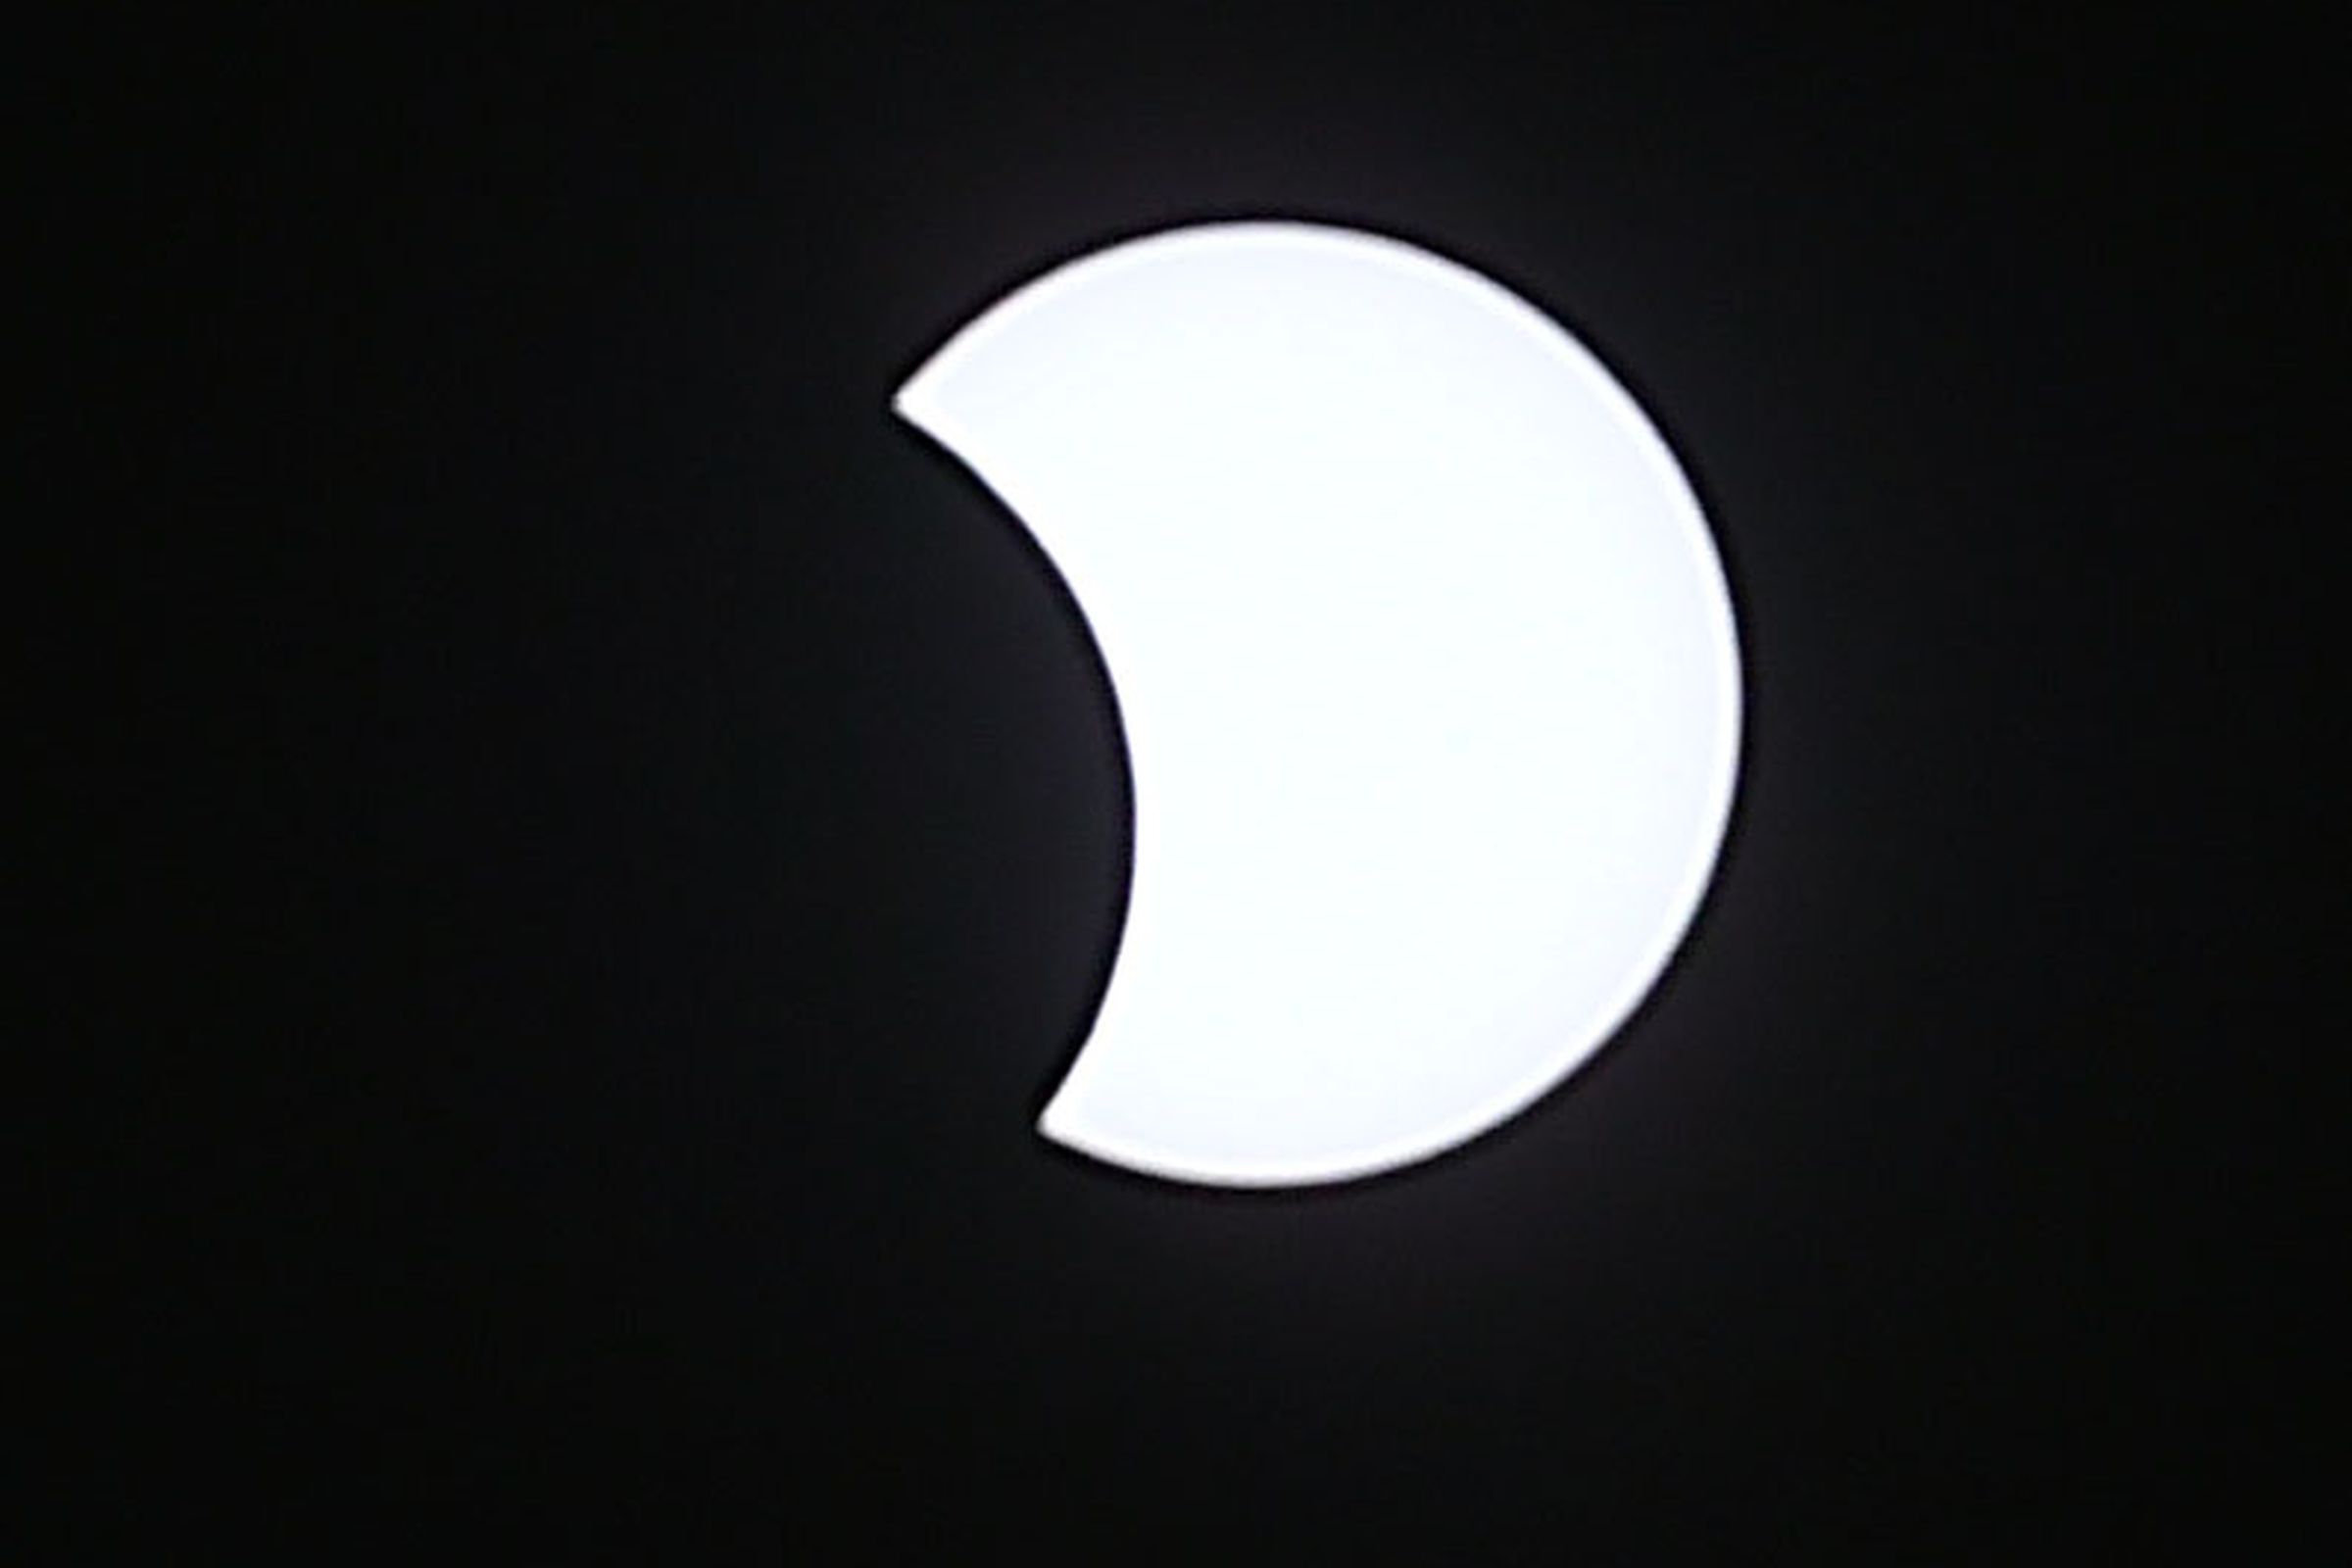 A view of a crescent sun partially blocked by the moon.